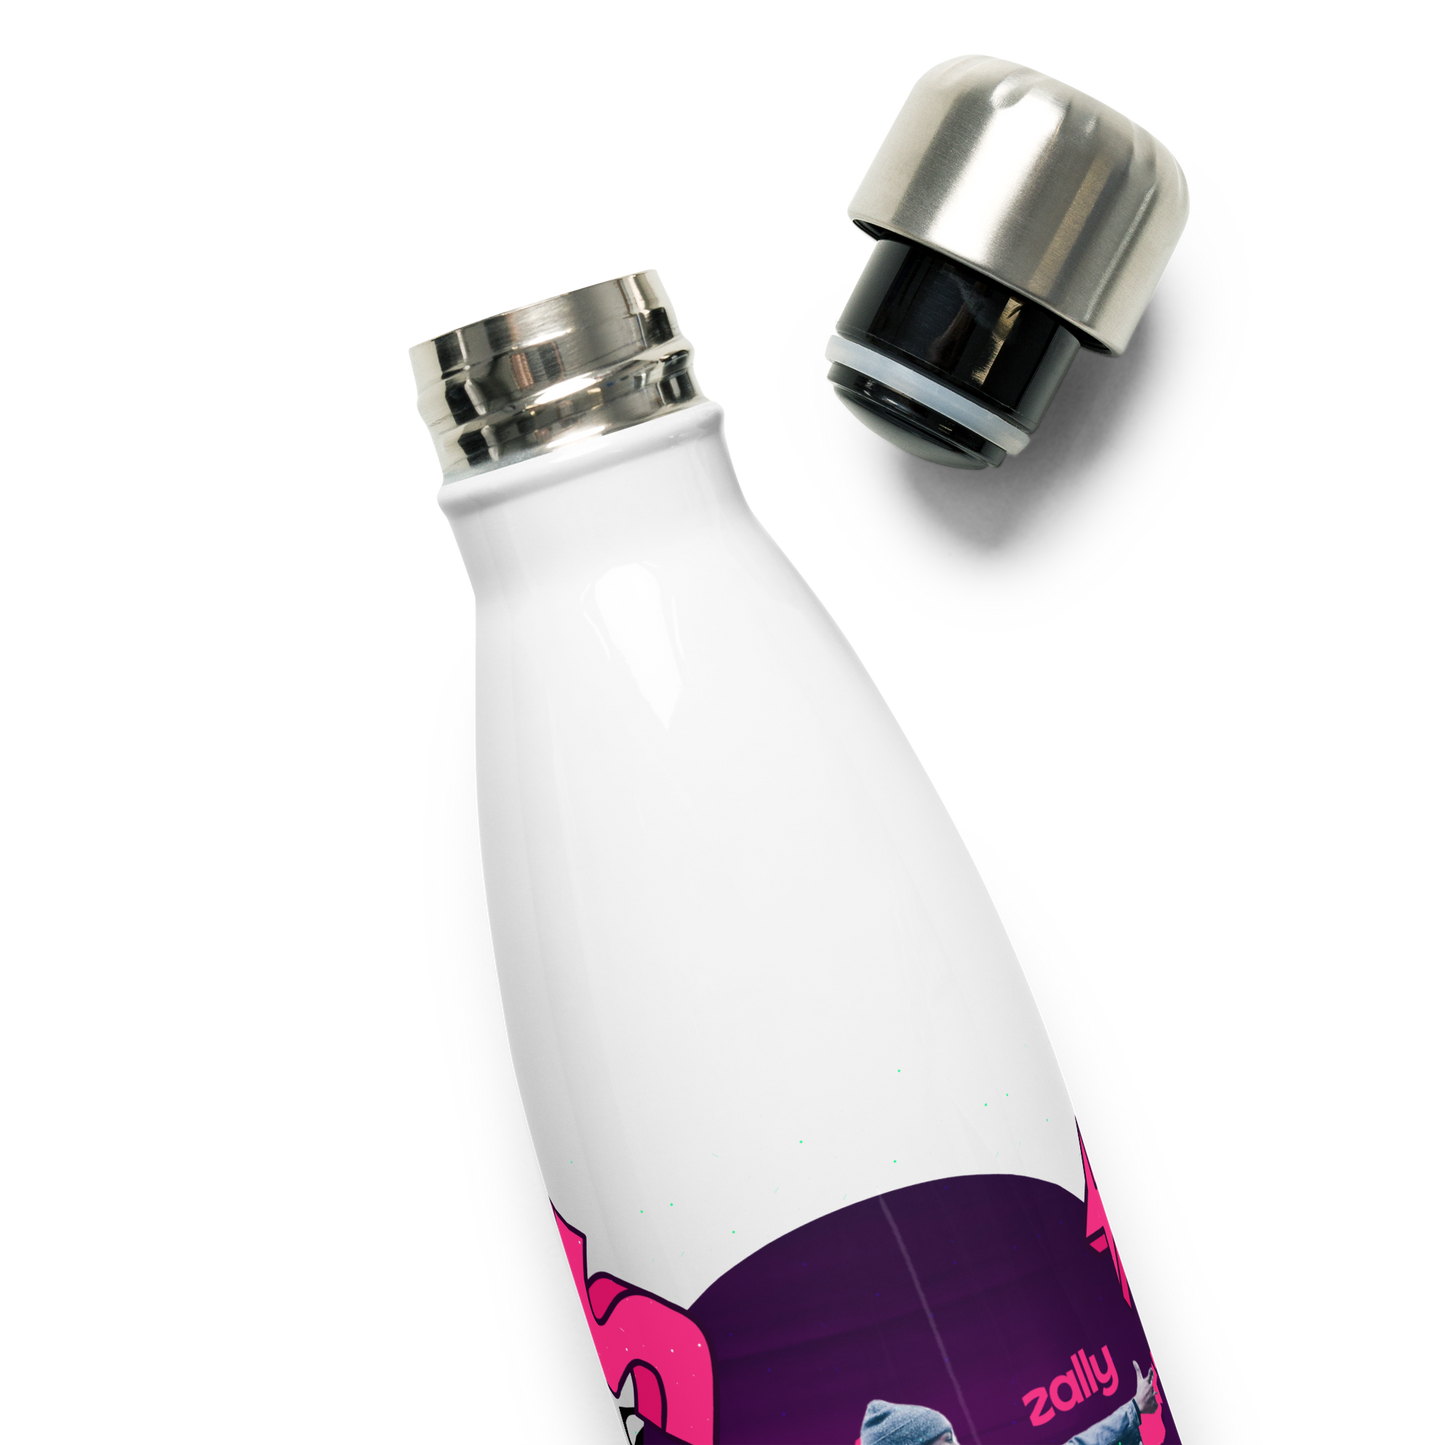 Zally Parkour Stainless steel water bottle (500ml)